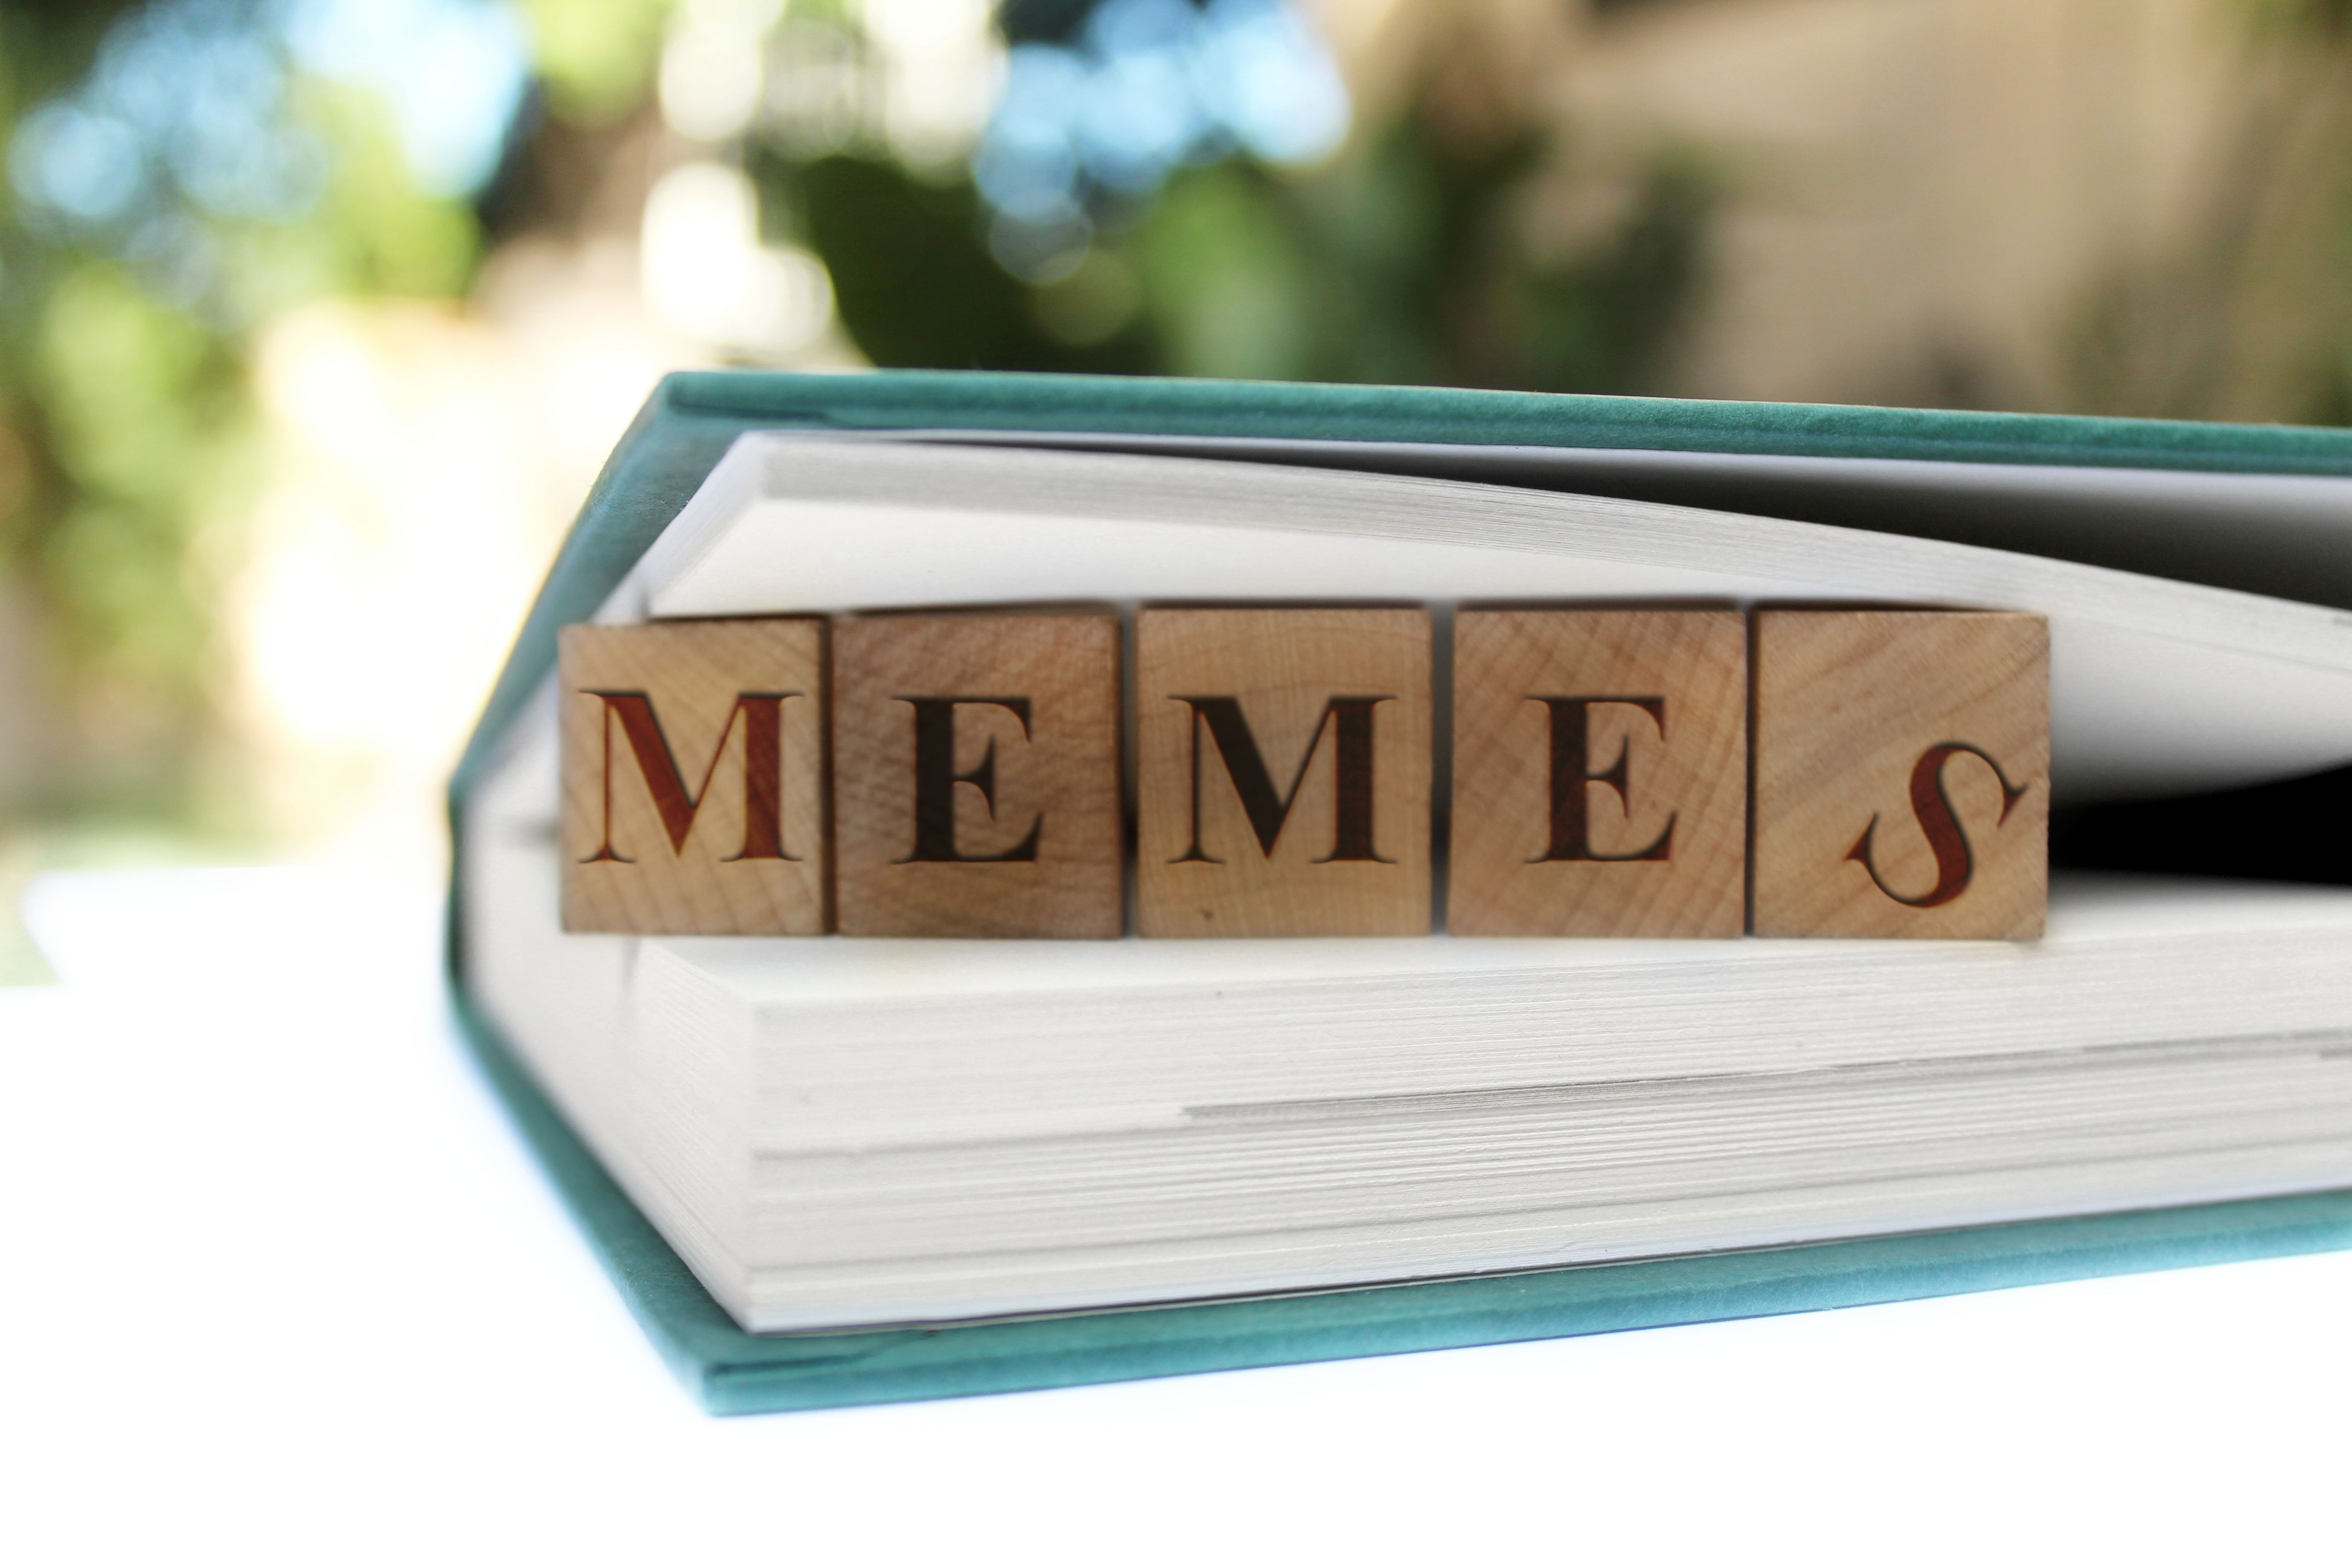 Read Between the lines. Concept Memes Research and learn. Wooden tiles between pages of a book. Stock photo. White space for your own info.